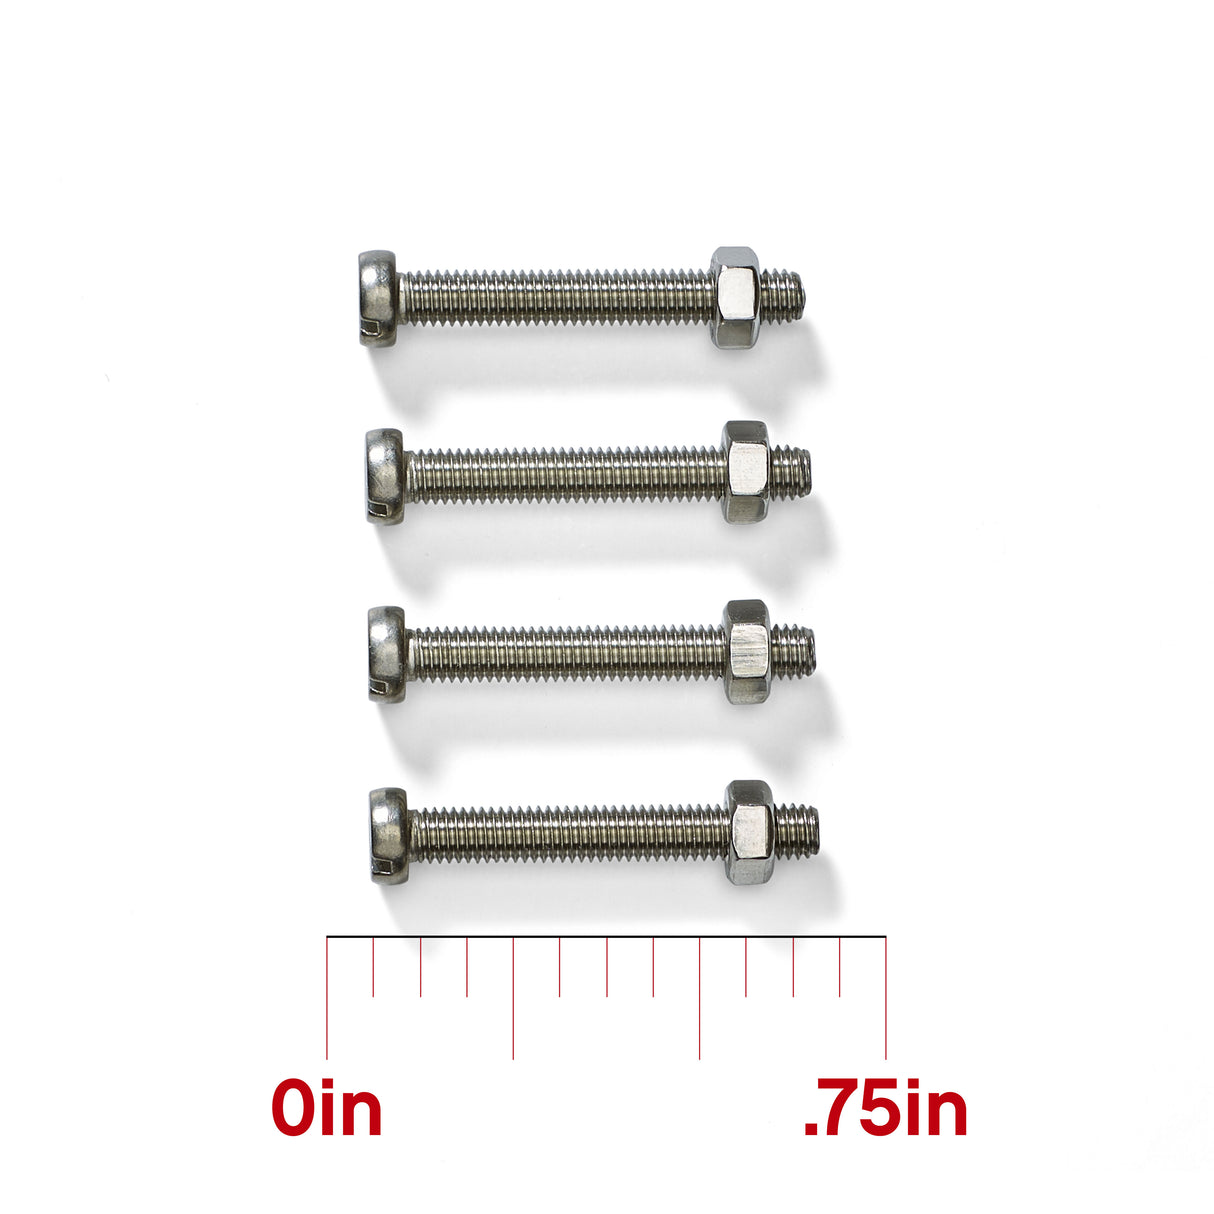 Long Bolts and Nuts for Fender Holder Rail Mounts TFR-404 (4-pack)